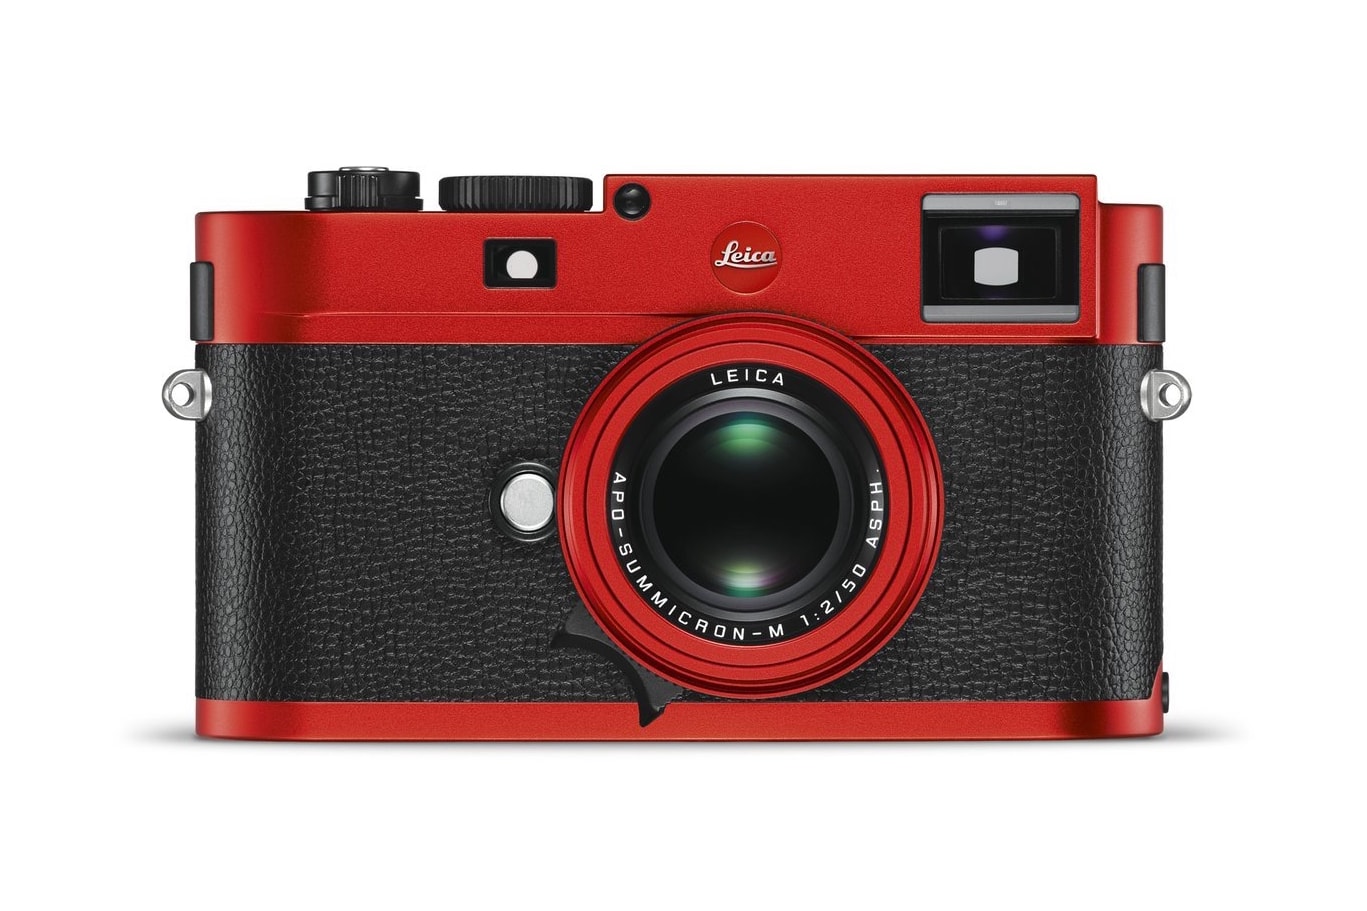 Leica Red Anodized M Typ 262 Limited Edition camera body rangefinder lens german unveils 100 APO-Summicron-M 50 mm f/2 ASPH lens